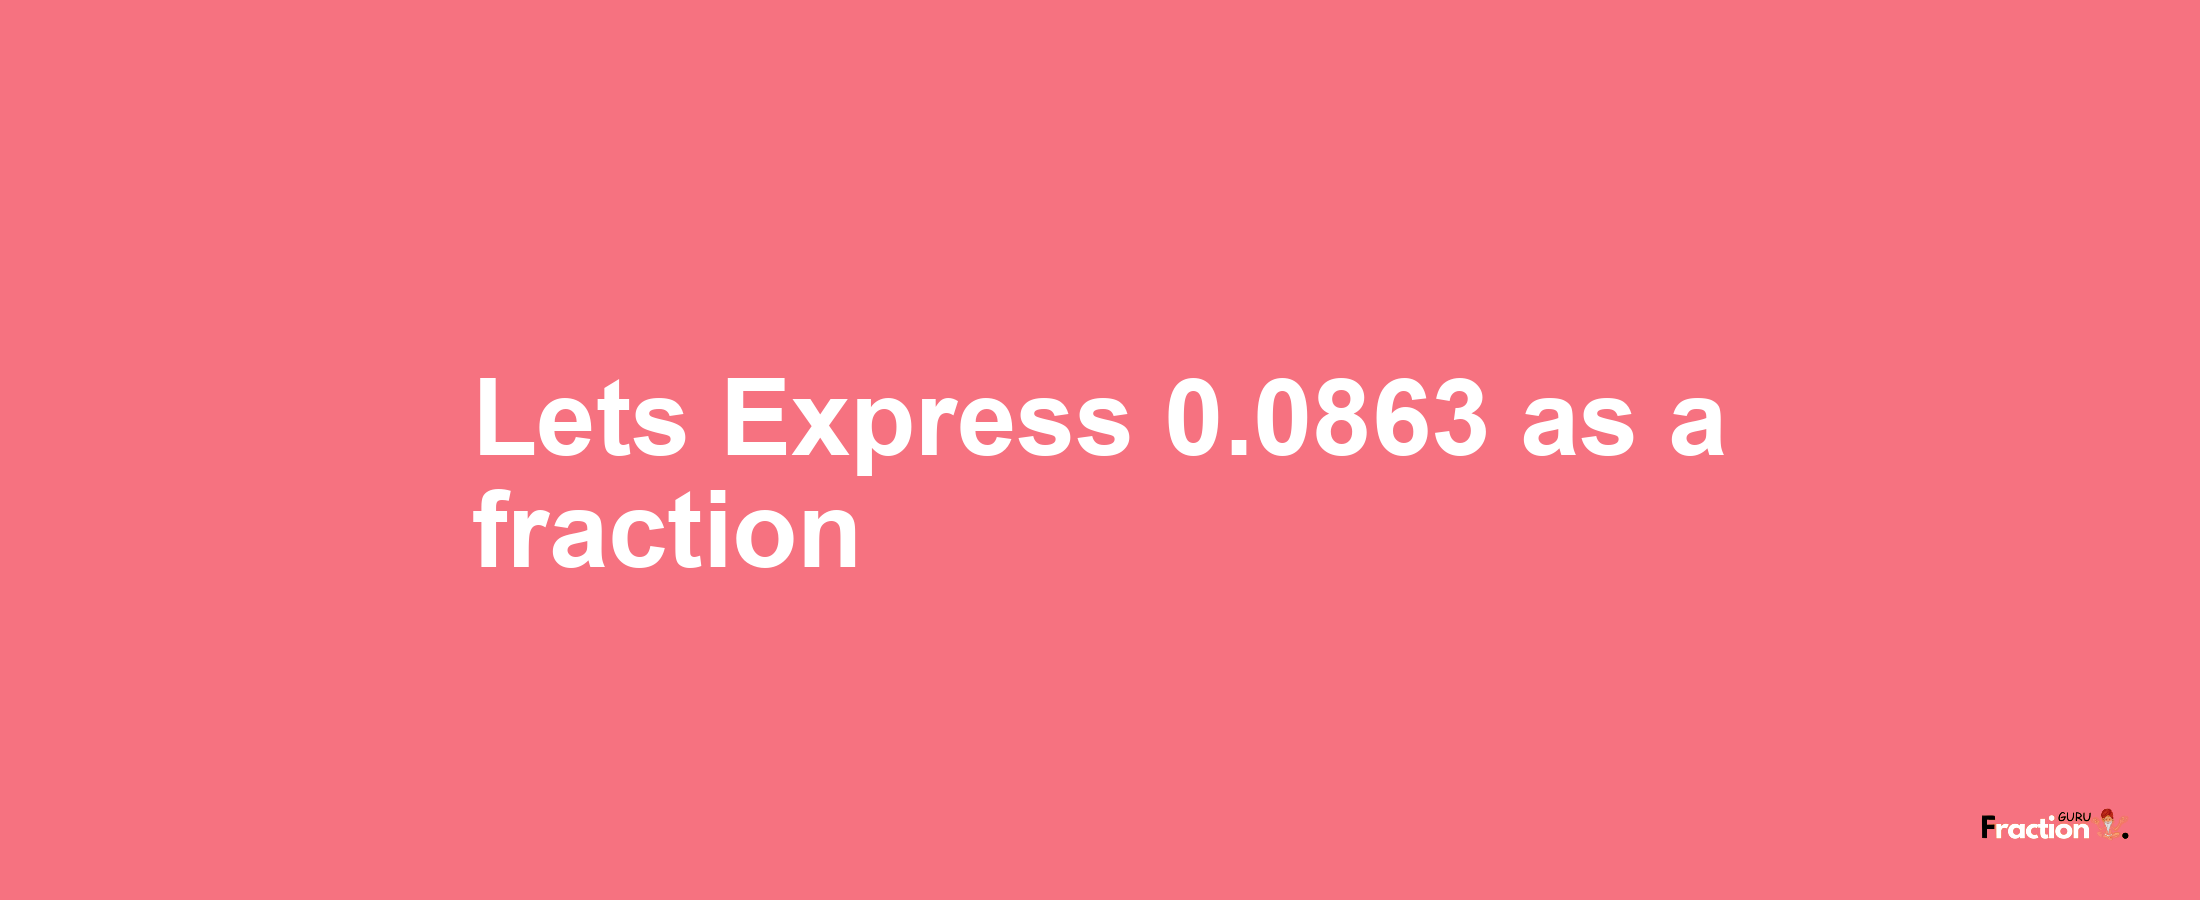 Lets Express 0.0863 as afraction